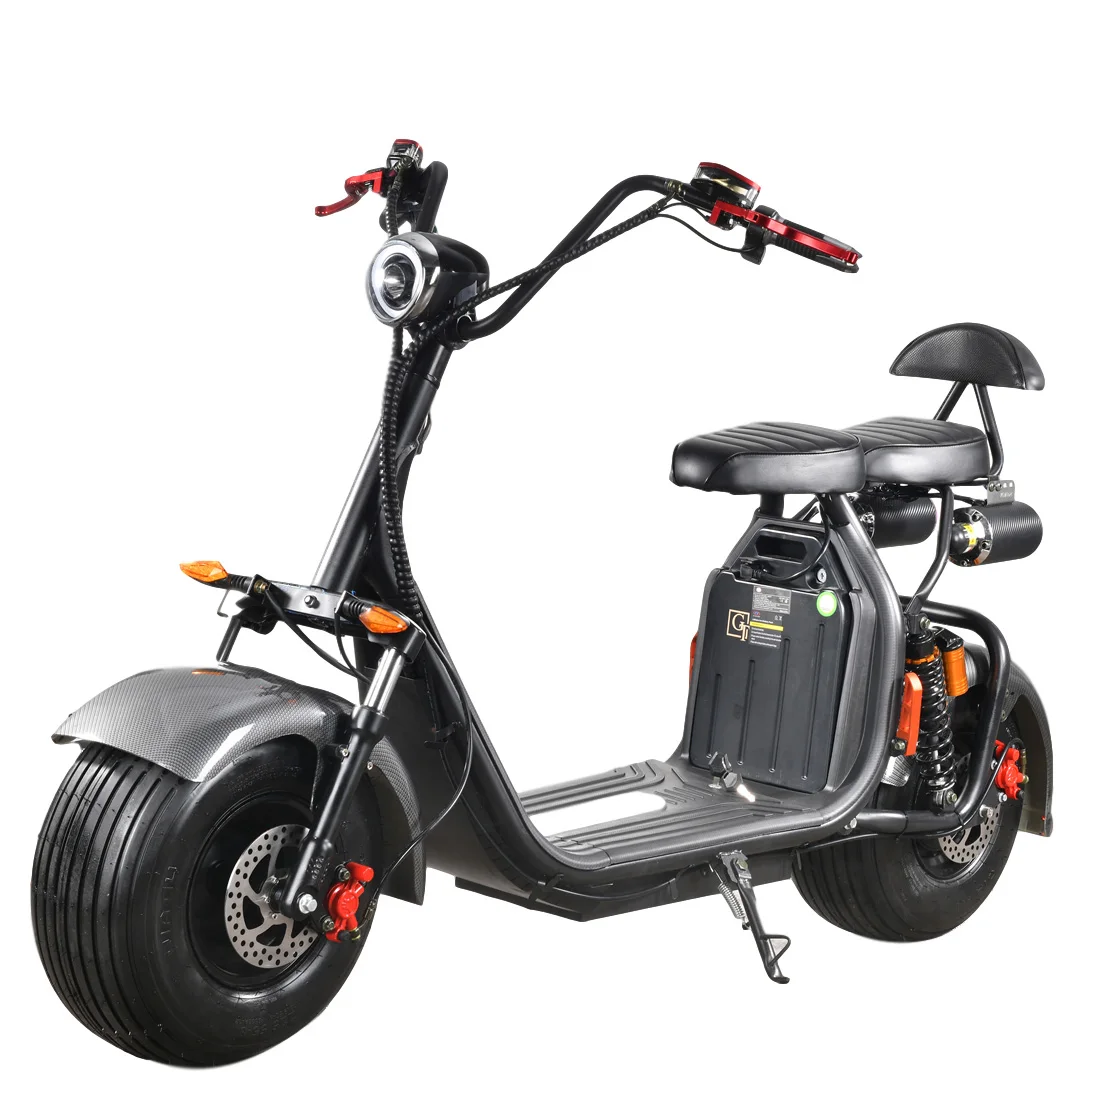 

Dropshipping 1000W/1500W/2000W/ Harleyment Electric Scooter Citycoco Scooter With Removable Battery Max Speed 40KM/H, Customized color